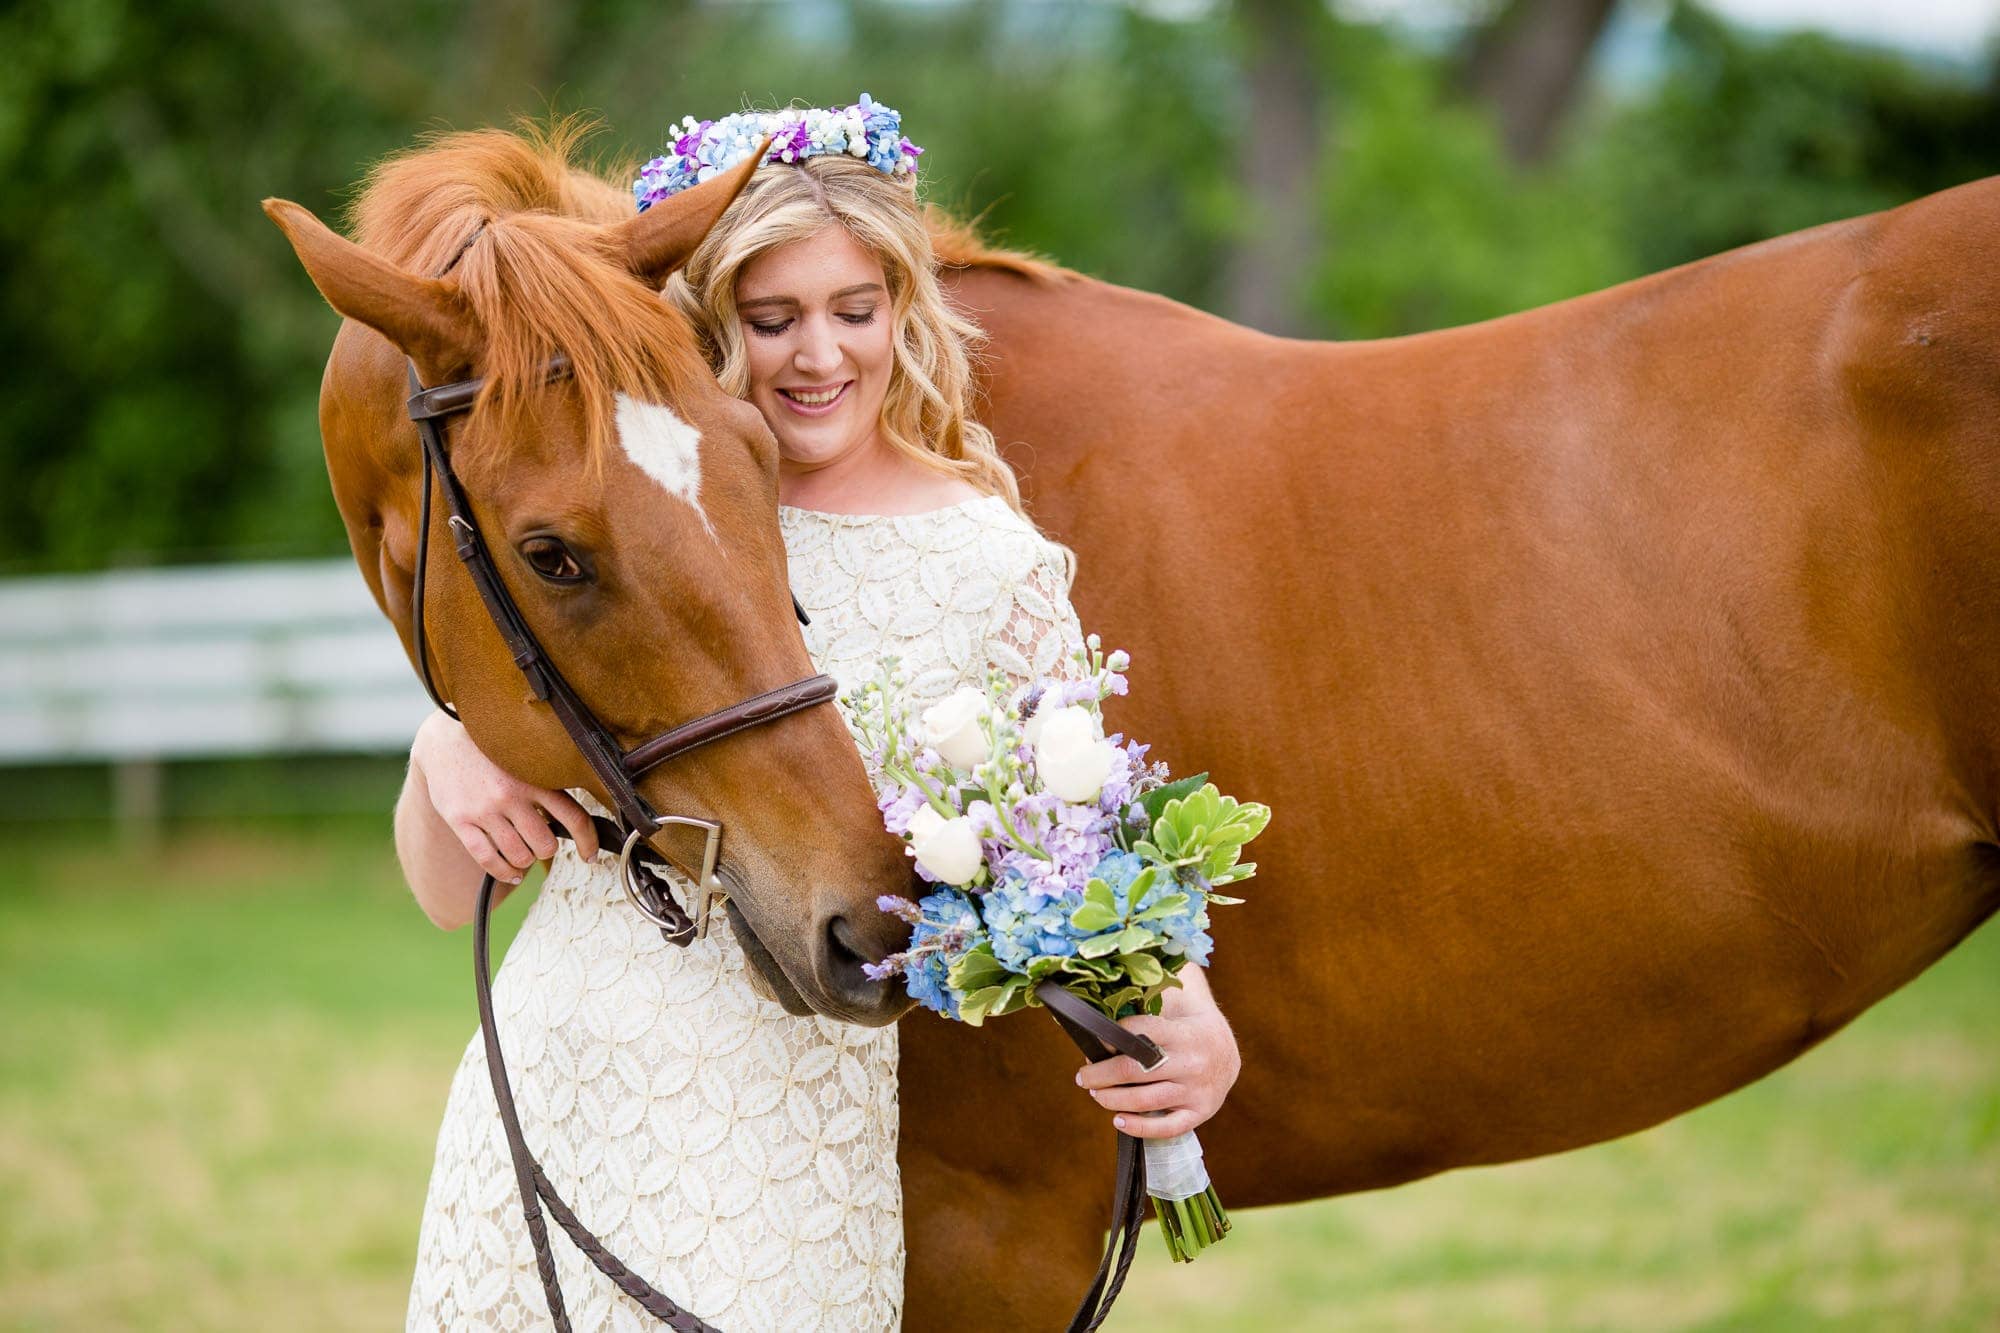 Brown horse nbext to a woman in a white wedding dress and flower crown trying to eat the brides bouquet